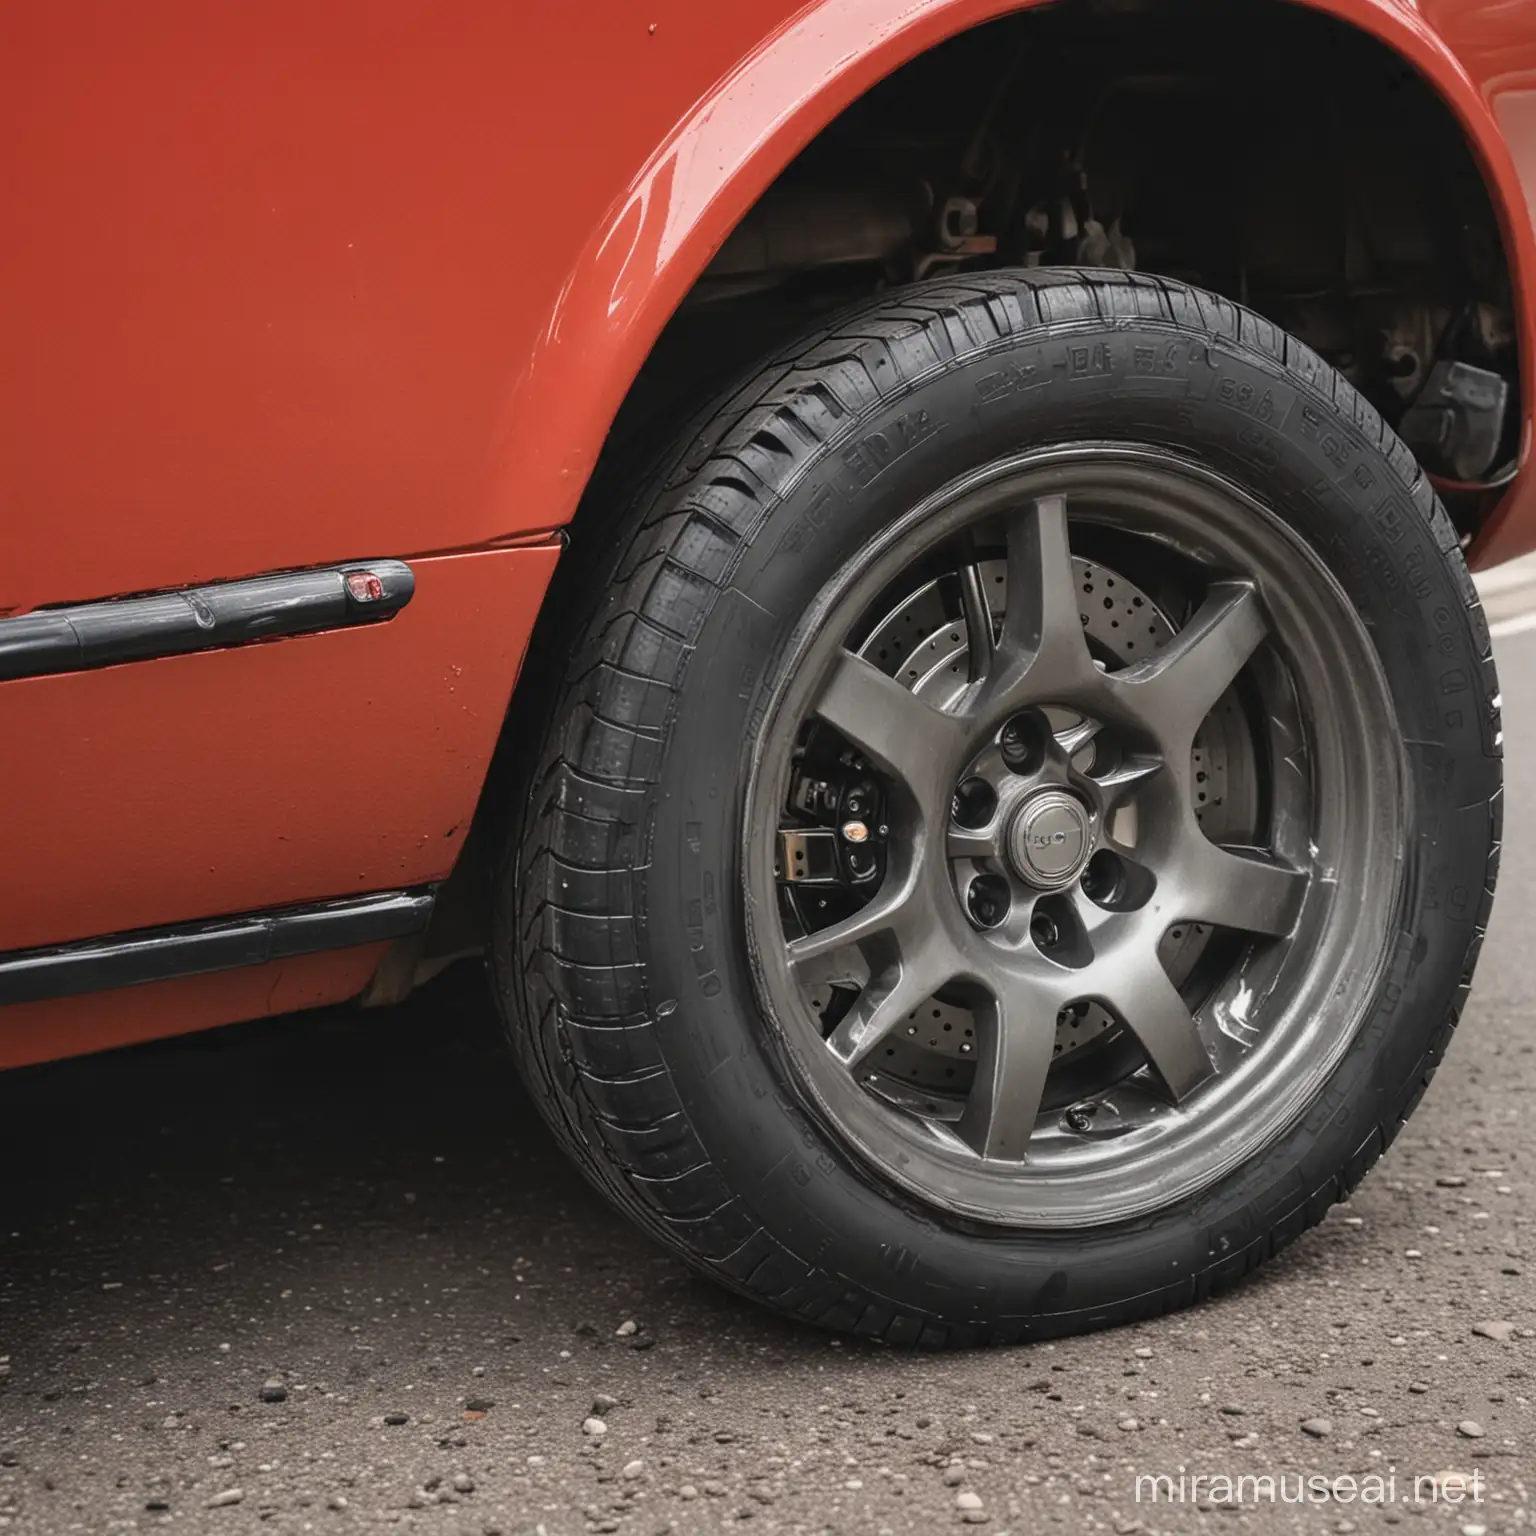 CloseUp of Red Car Front Tire